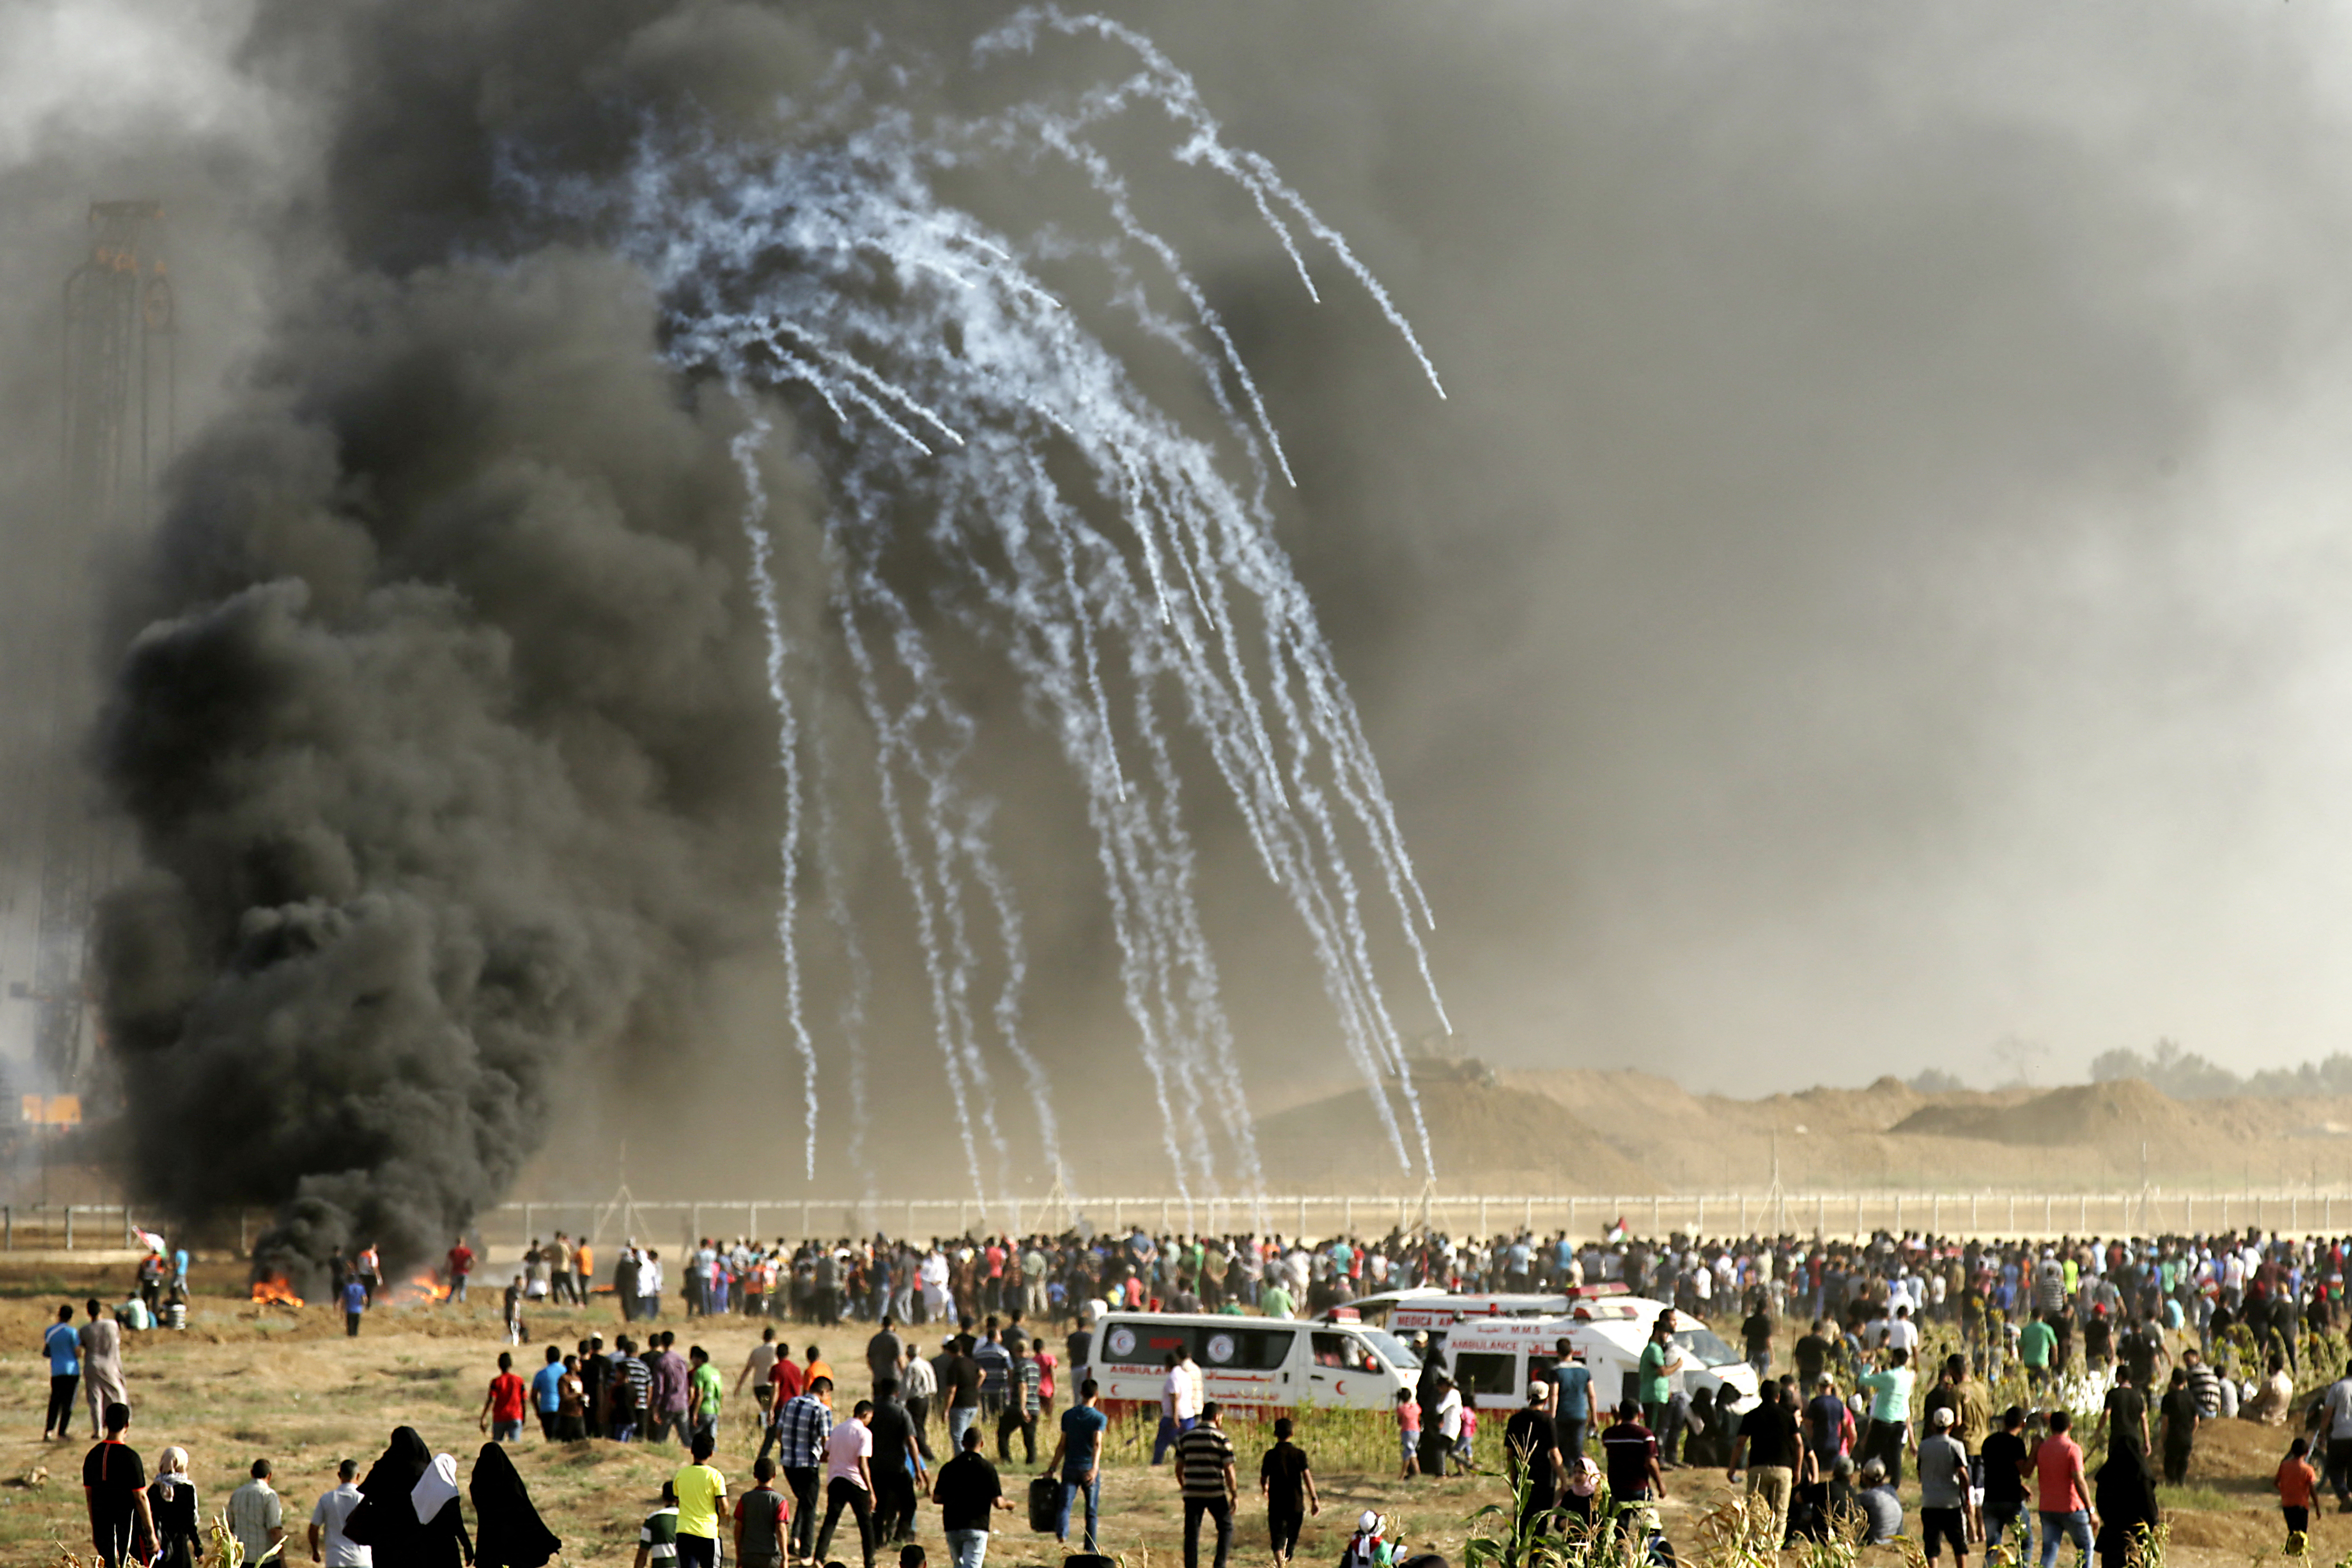 Palestinian protesters run for cover after Israeli forces launched tear gas canisters during a demonstration along the border between the Gaza strip and Israel, east of Gaza city on June 22, 2018.
MAHMUD HAMS / AFP